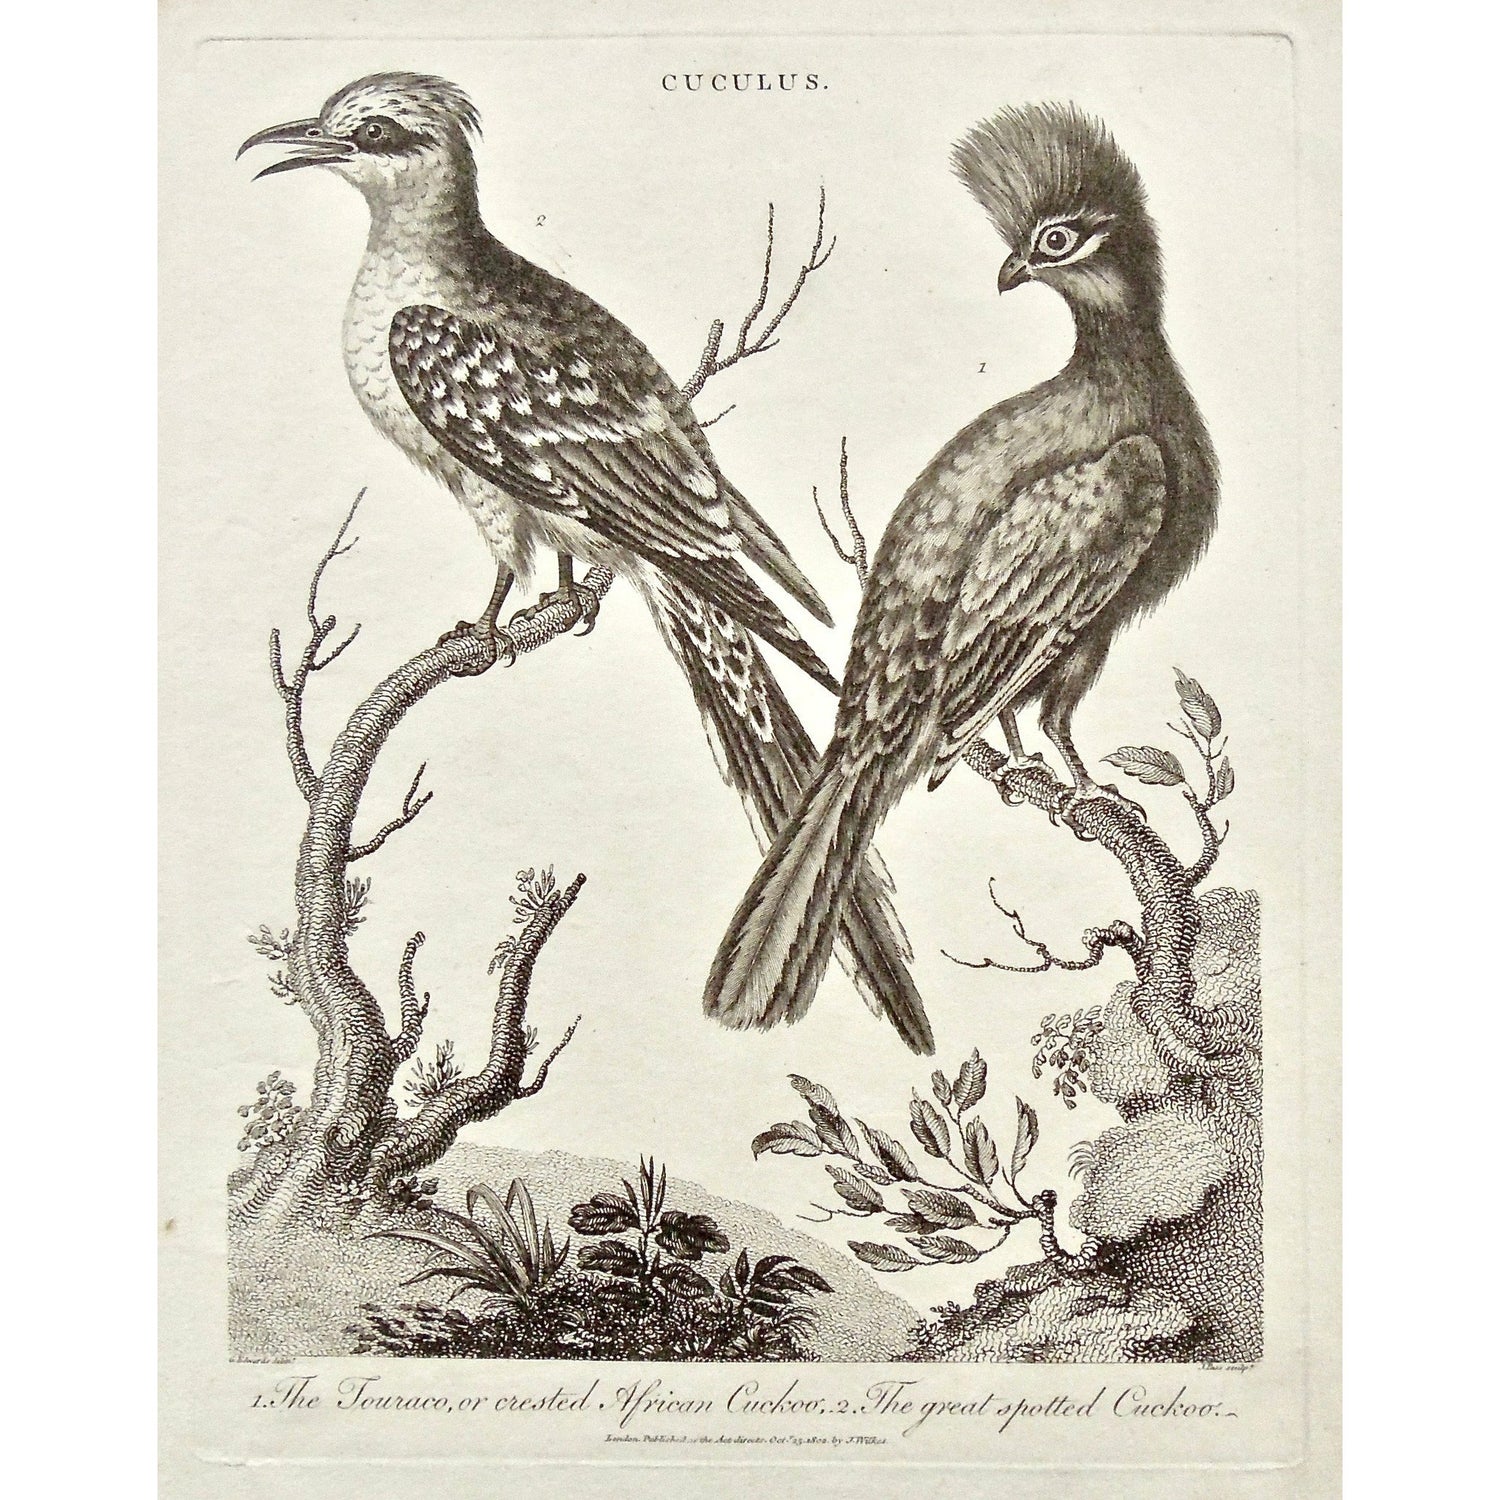 Cuculus, Touraco, Crested African Cuckoo, Crested, African, Cuckoo, Great spotted Cuckoo, Great spotted, bird, Birds, Ornithology, feathered heads, feathers, Universal Dictionary, Dictionary, Encyclopaedia Londinensis, Encyclopedia, London, Antique Print, Antique, Prints, Vintage, Vintage Art, Art, Wall art, Decor, wall decor, Home Decor, design, engraving, original, authentic, Collectors, Collectable, rare books, rare, book, printmaking, print, printers, John Wilkes, Wilkes, Adlard, Pass, 1802,